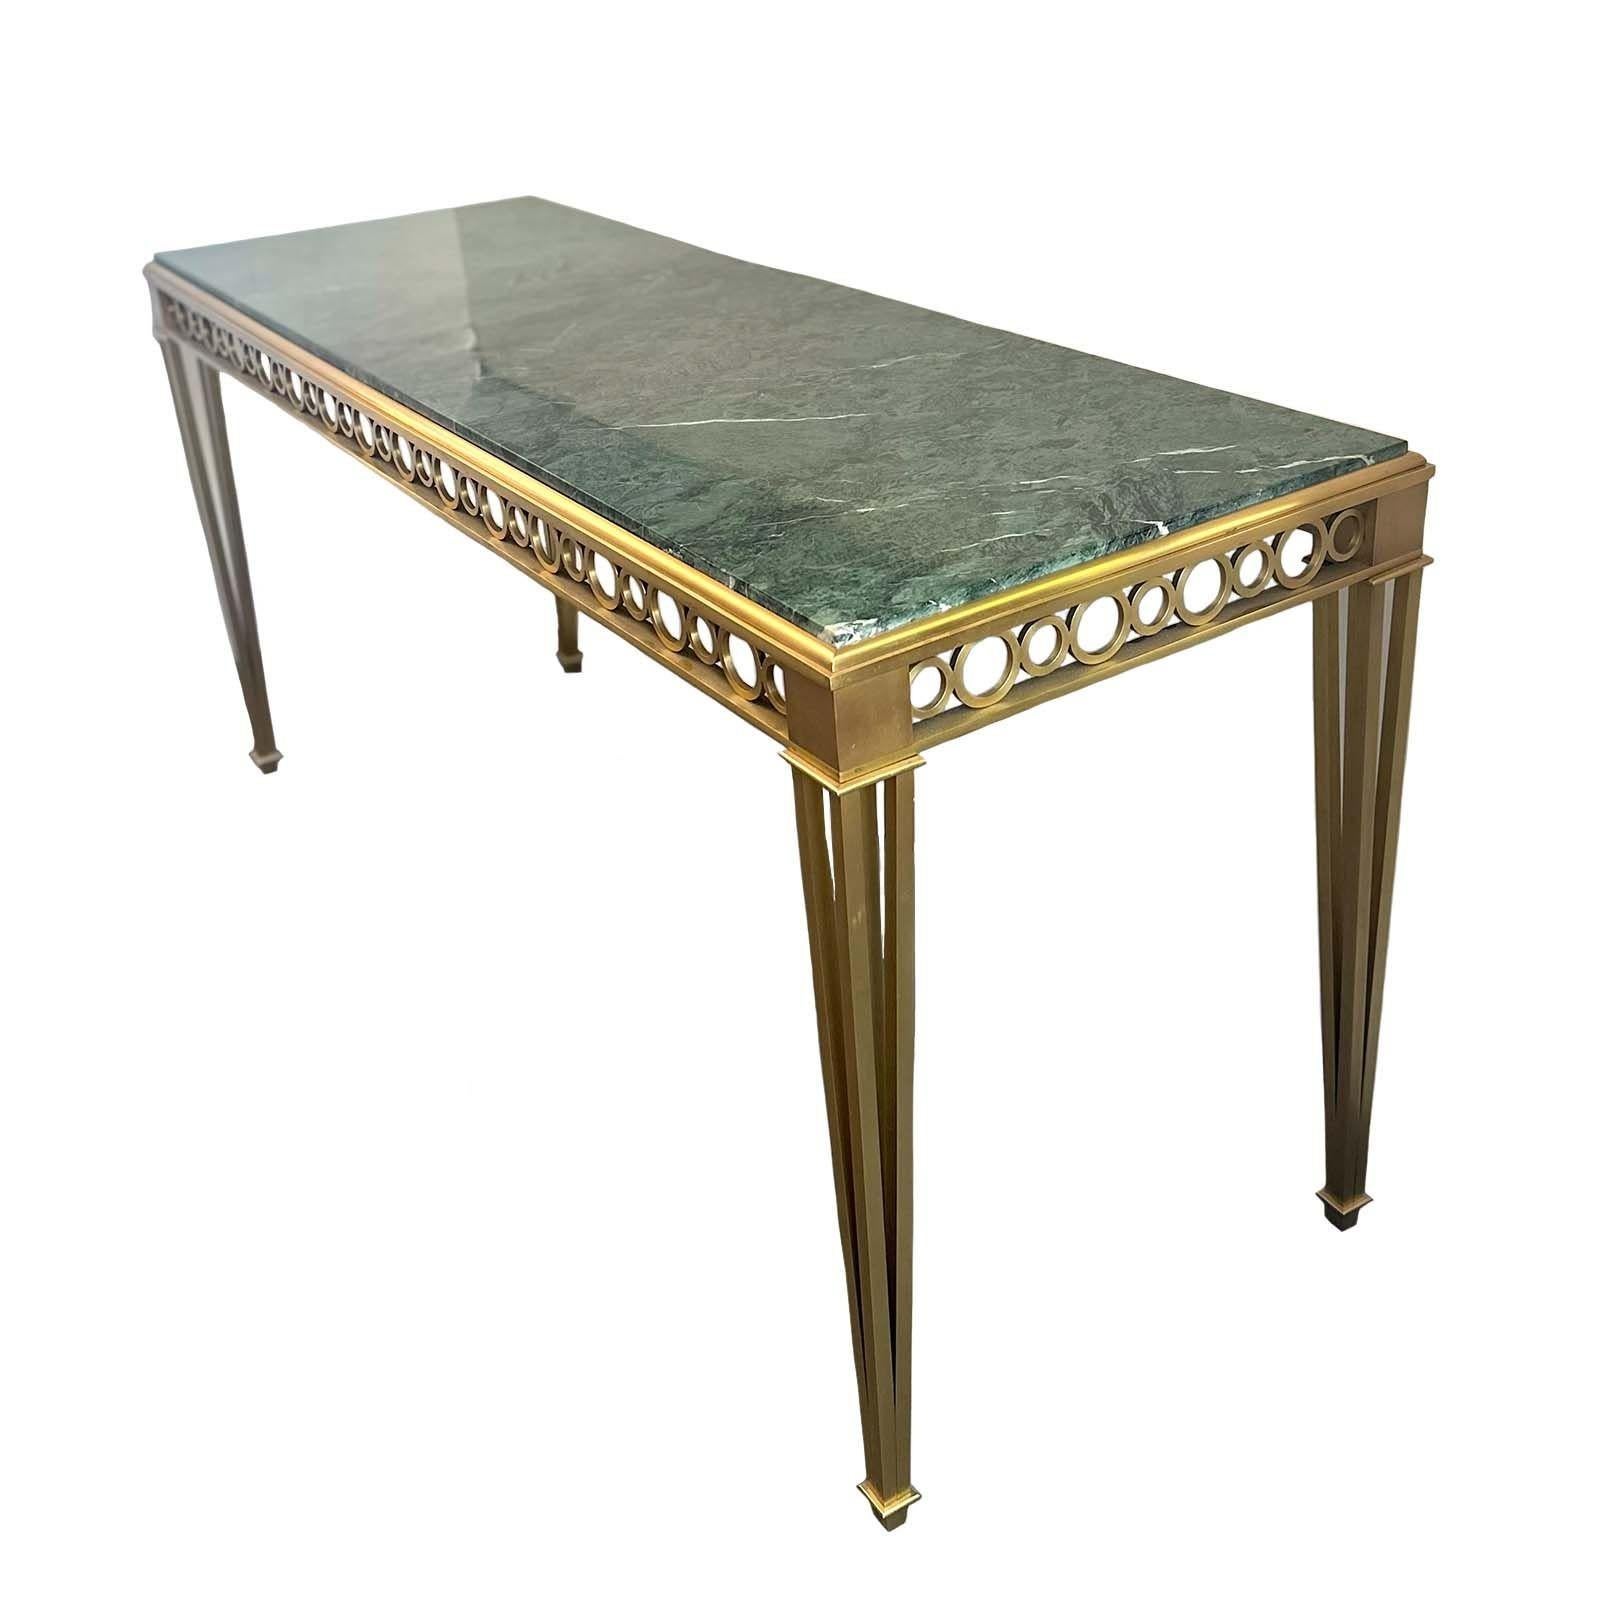 Bronze and marble Neoclassical-style console table by Paul M. Jones surrounded by circle pattern apron details and tapered legs in quality bronze. The piece stands out due to the beautiful green marble top. Made in USA, c. 1960's.
Dimensions:
31